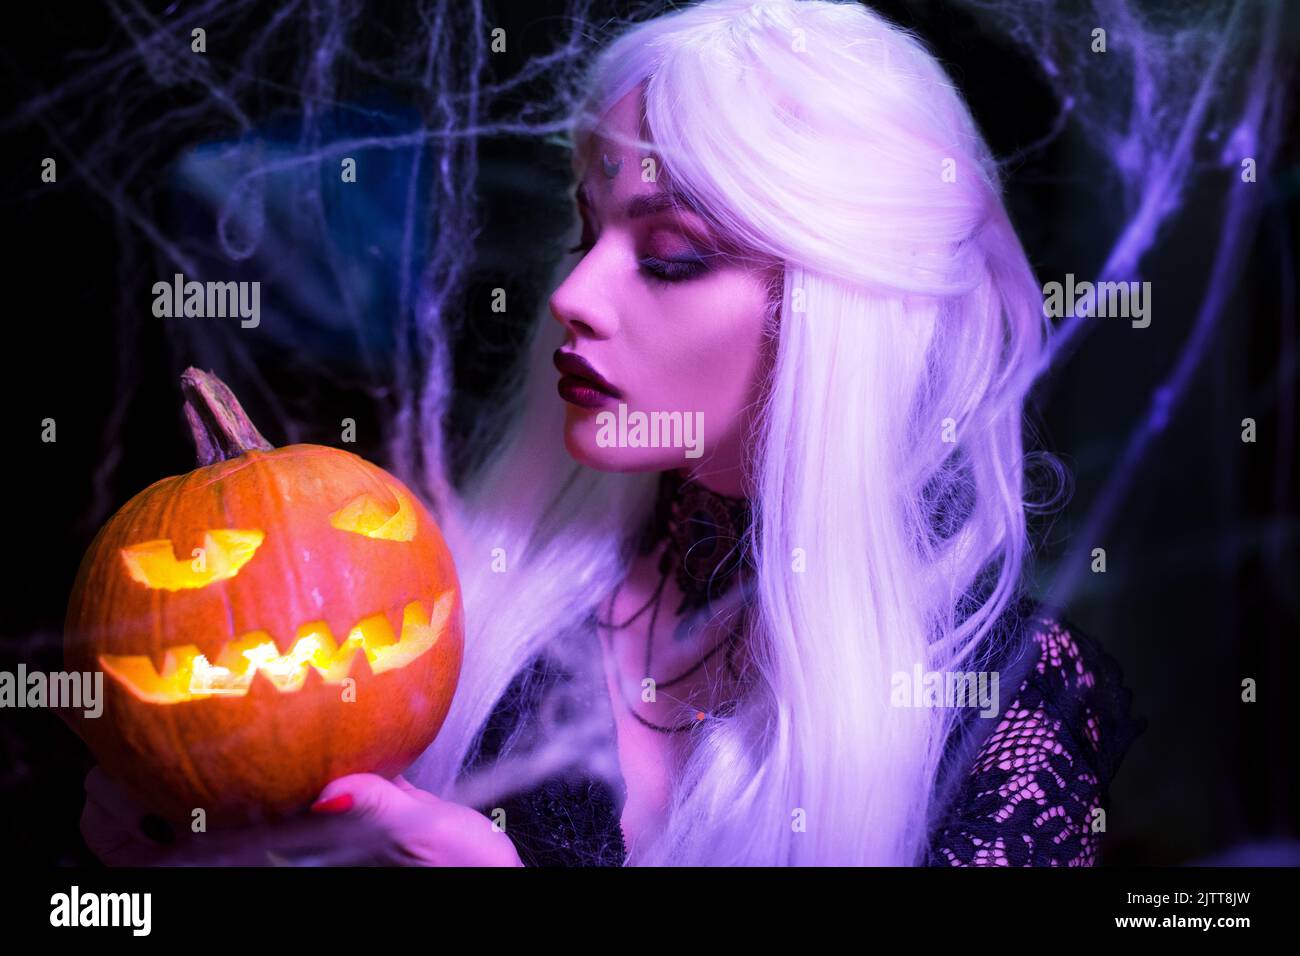 Sexy witch with hallowen makeup and long white hair holding pumpkin on black background Stock Photo